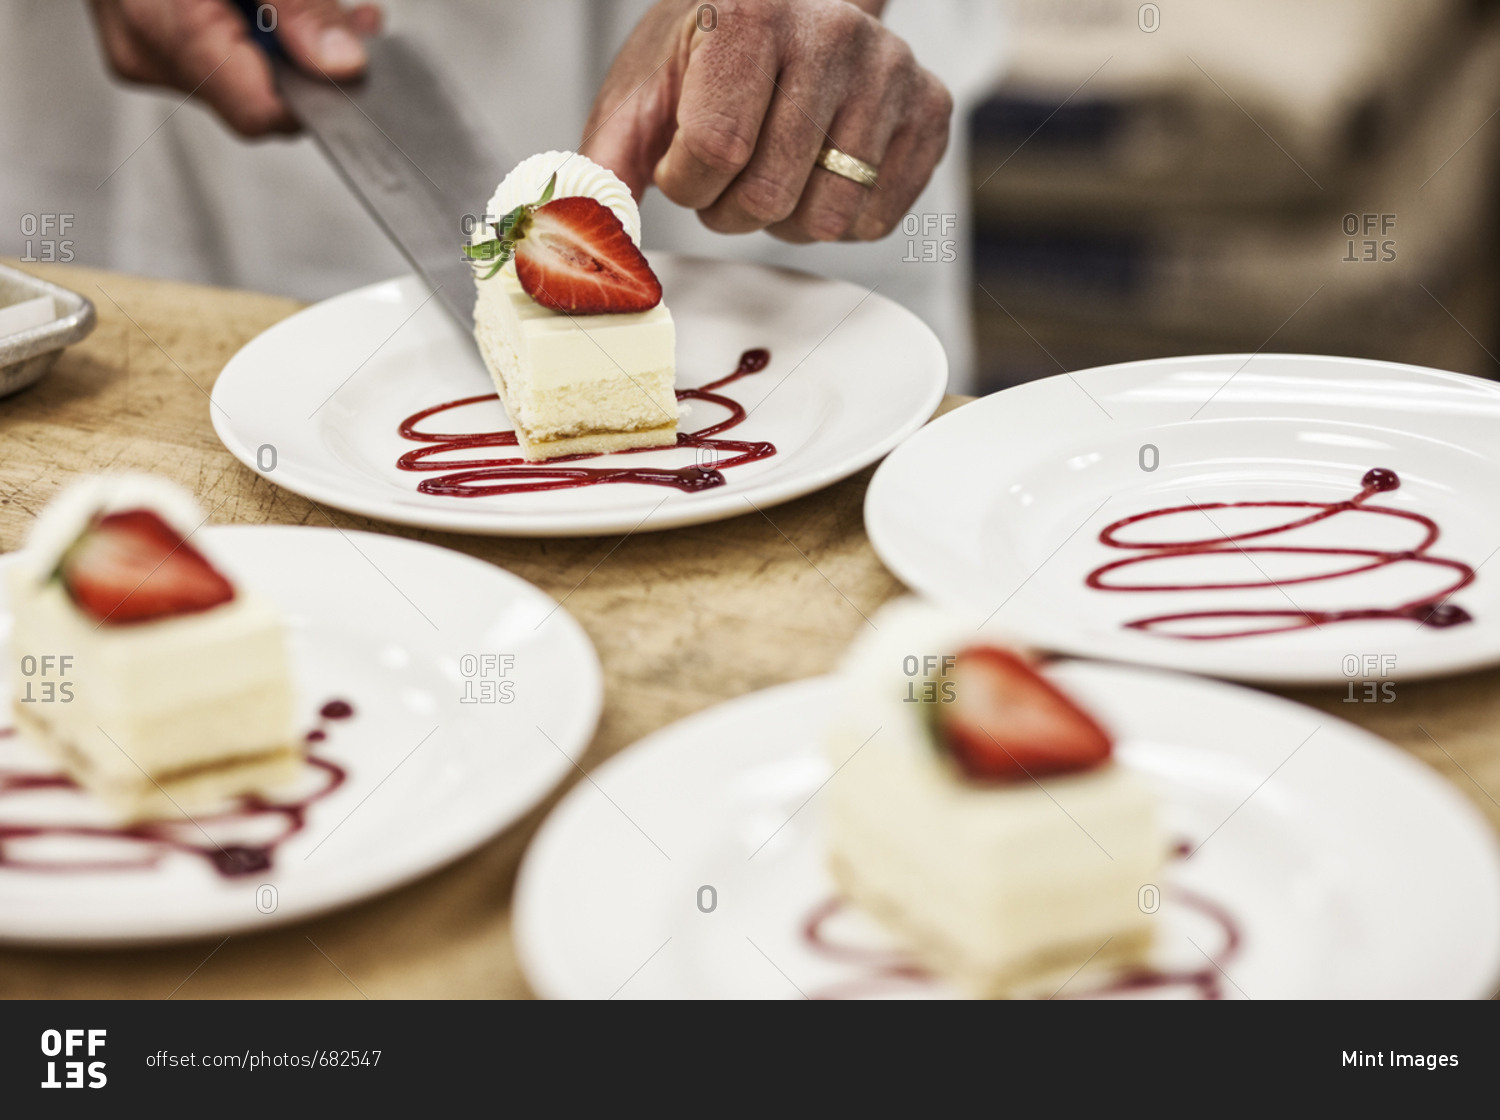 Chef hands placing a layered desert on a plate, presentation of a sweet dish.